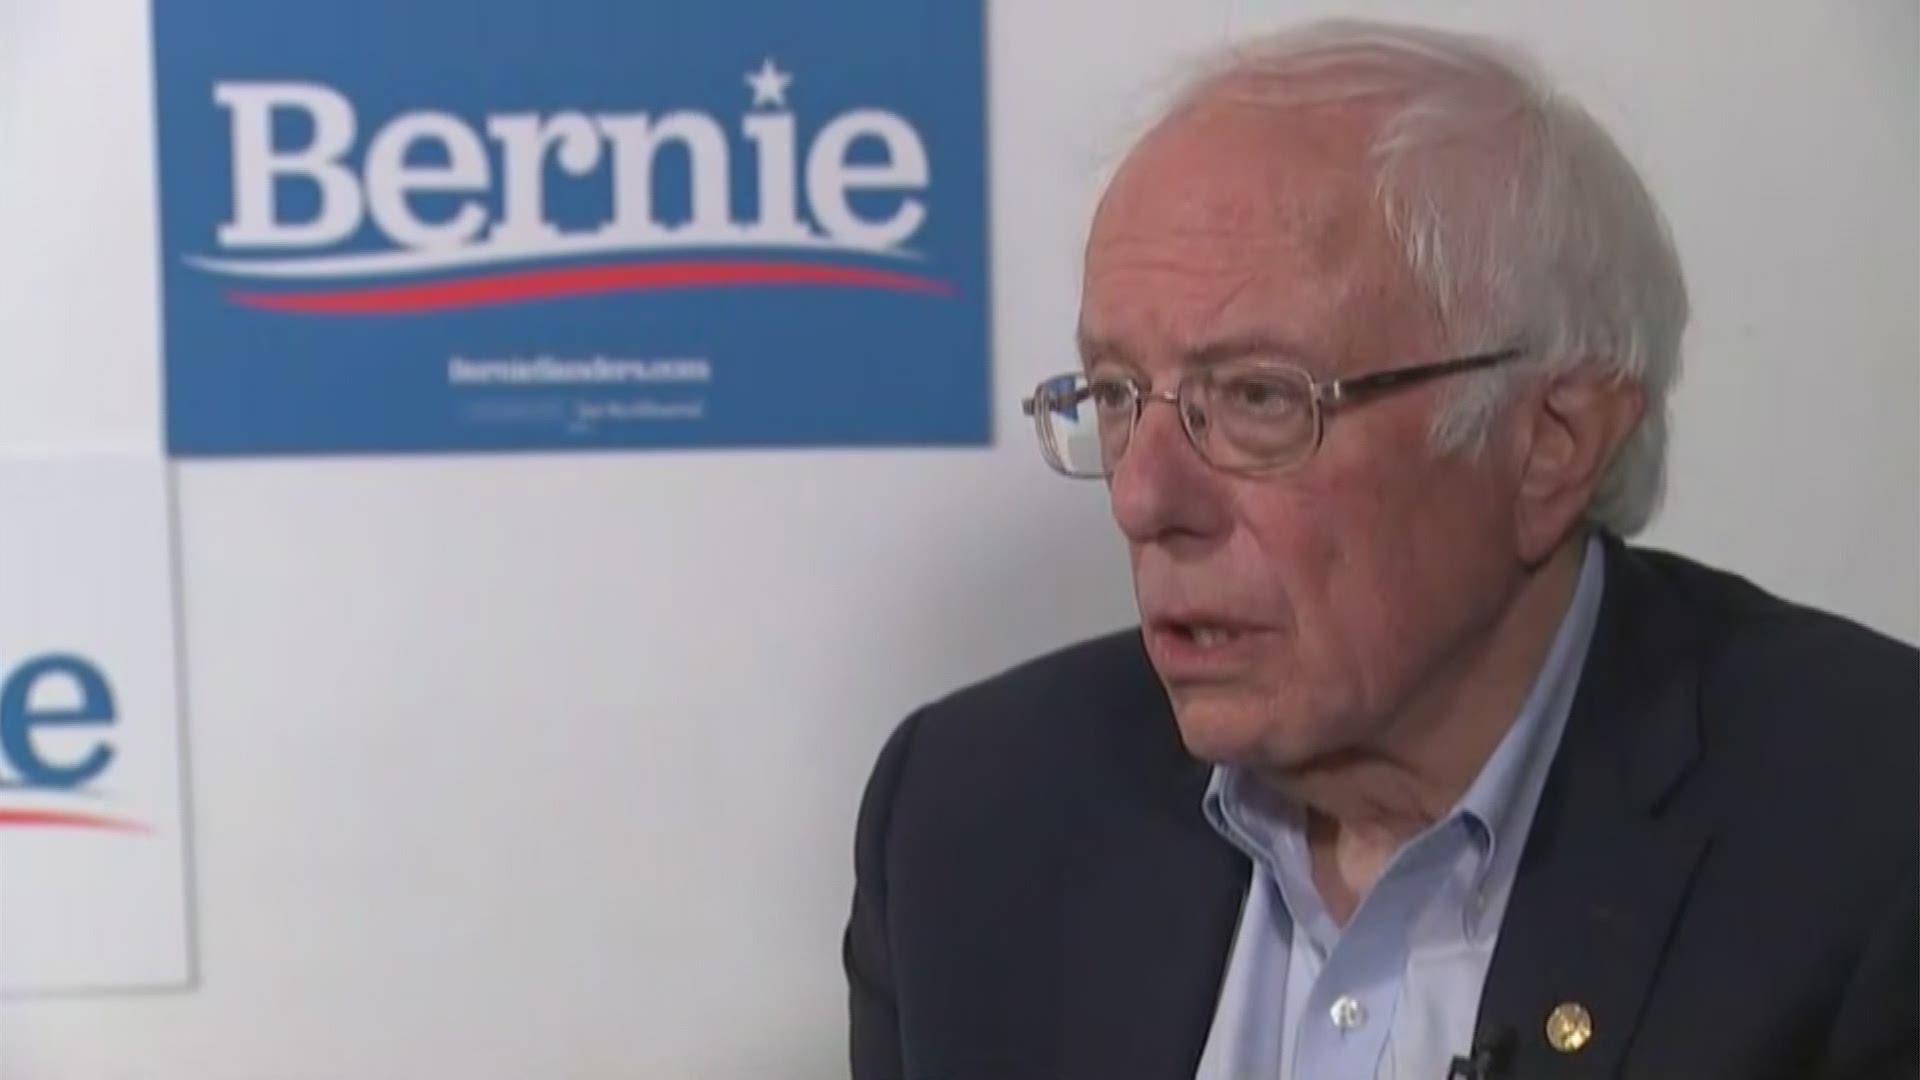 KING 5's Chris Daniels sat down for a one-on-one interview with Presidential candidate Bernie Sanders. Sanders held a rally for supporters at the Tacoma Dome.